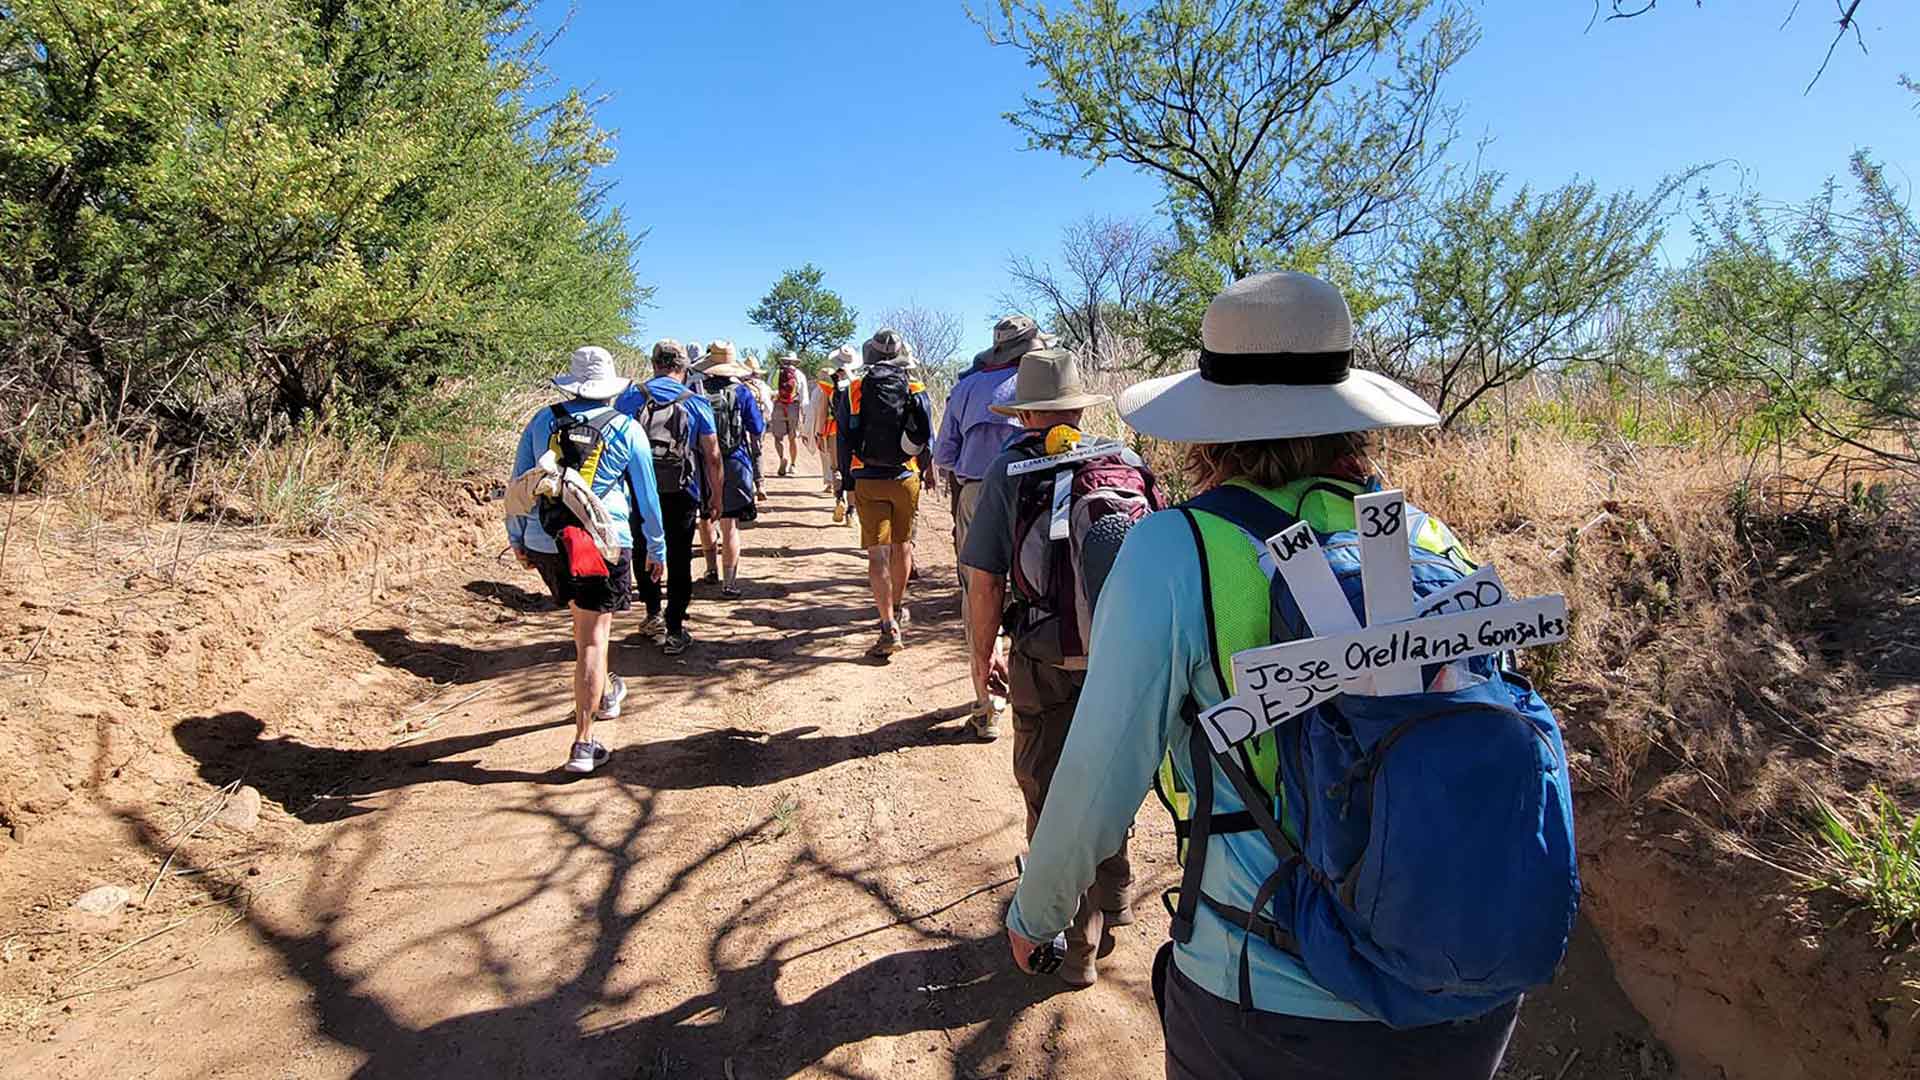 Participants on the 20th annual Migrant Trail Walk carry crosses with the names of those who have died in the U.S.-Mexico borderlands. 